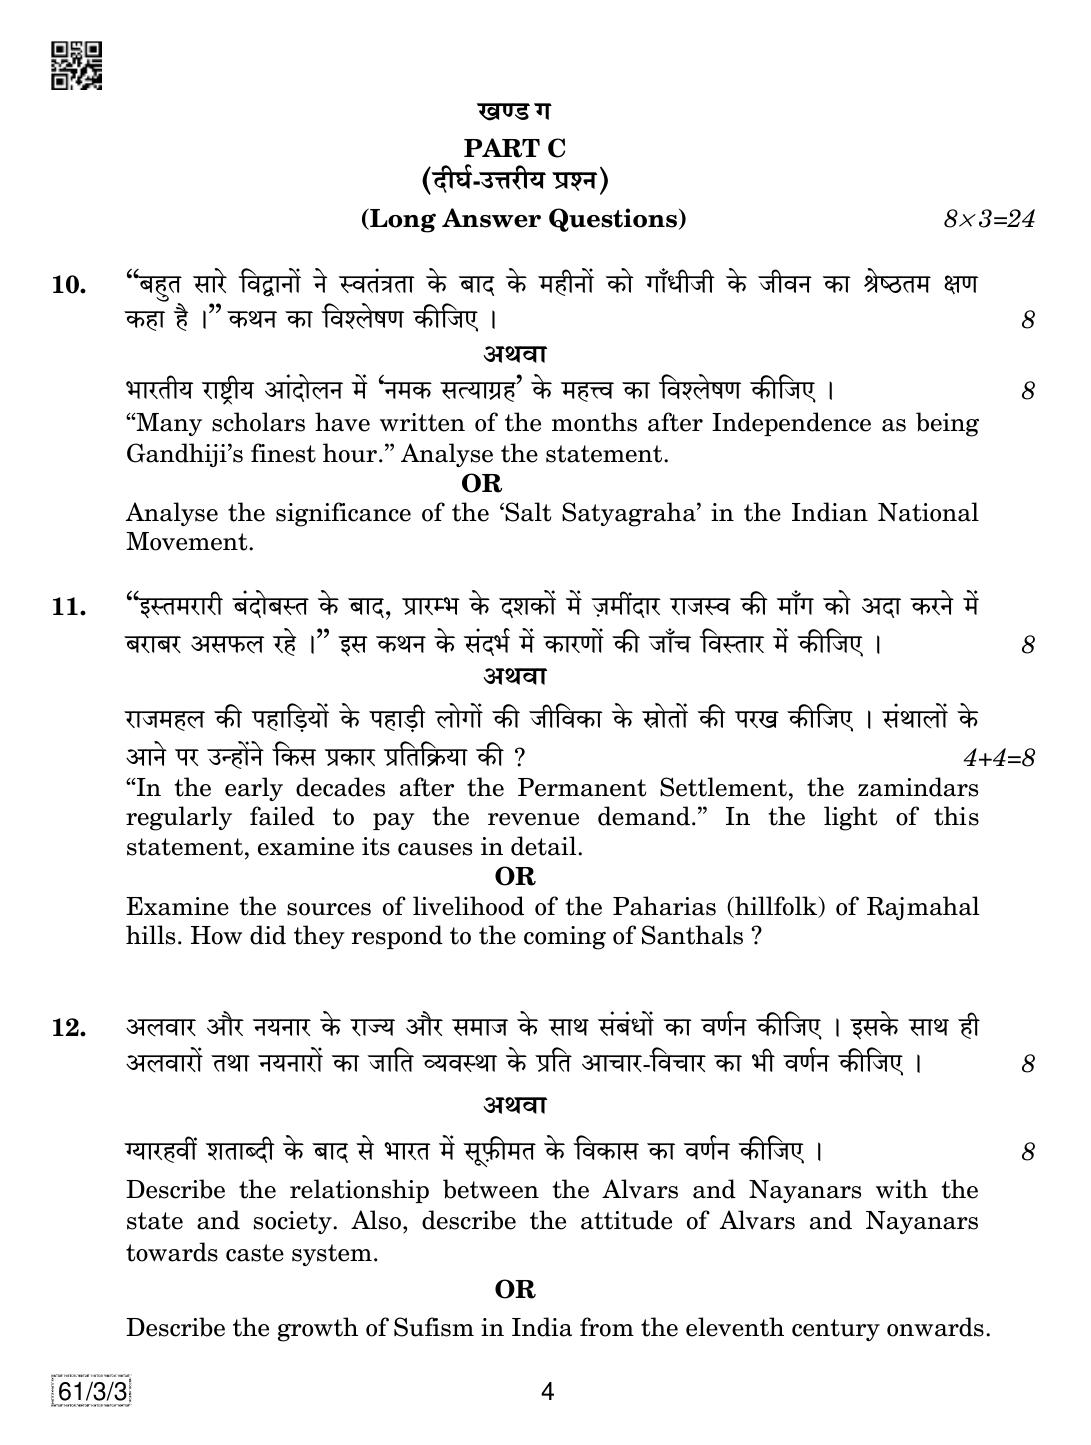 CBSE Class 12 61-3-3 History 2019 Question Paper - Page 4